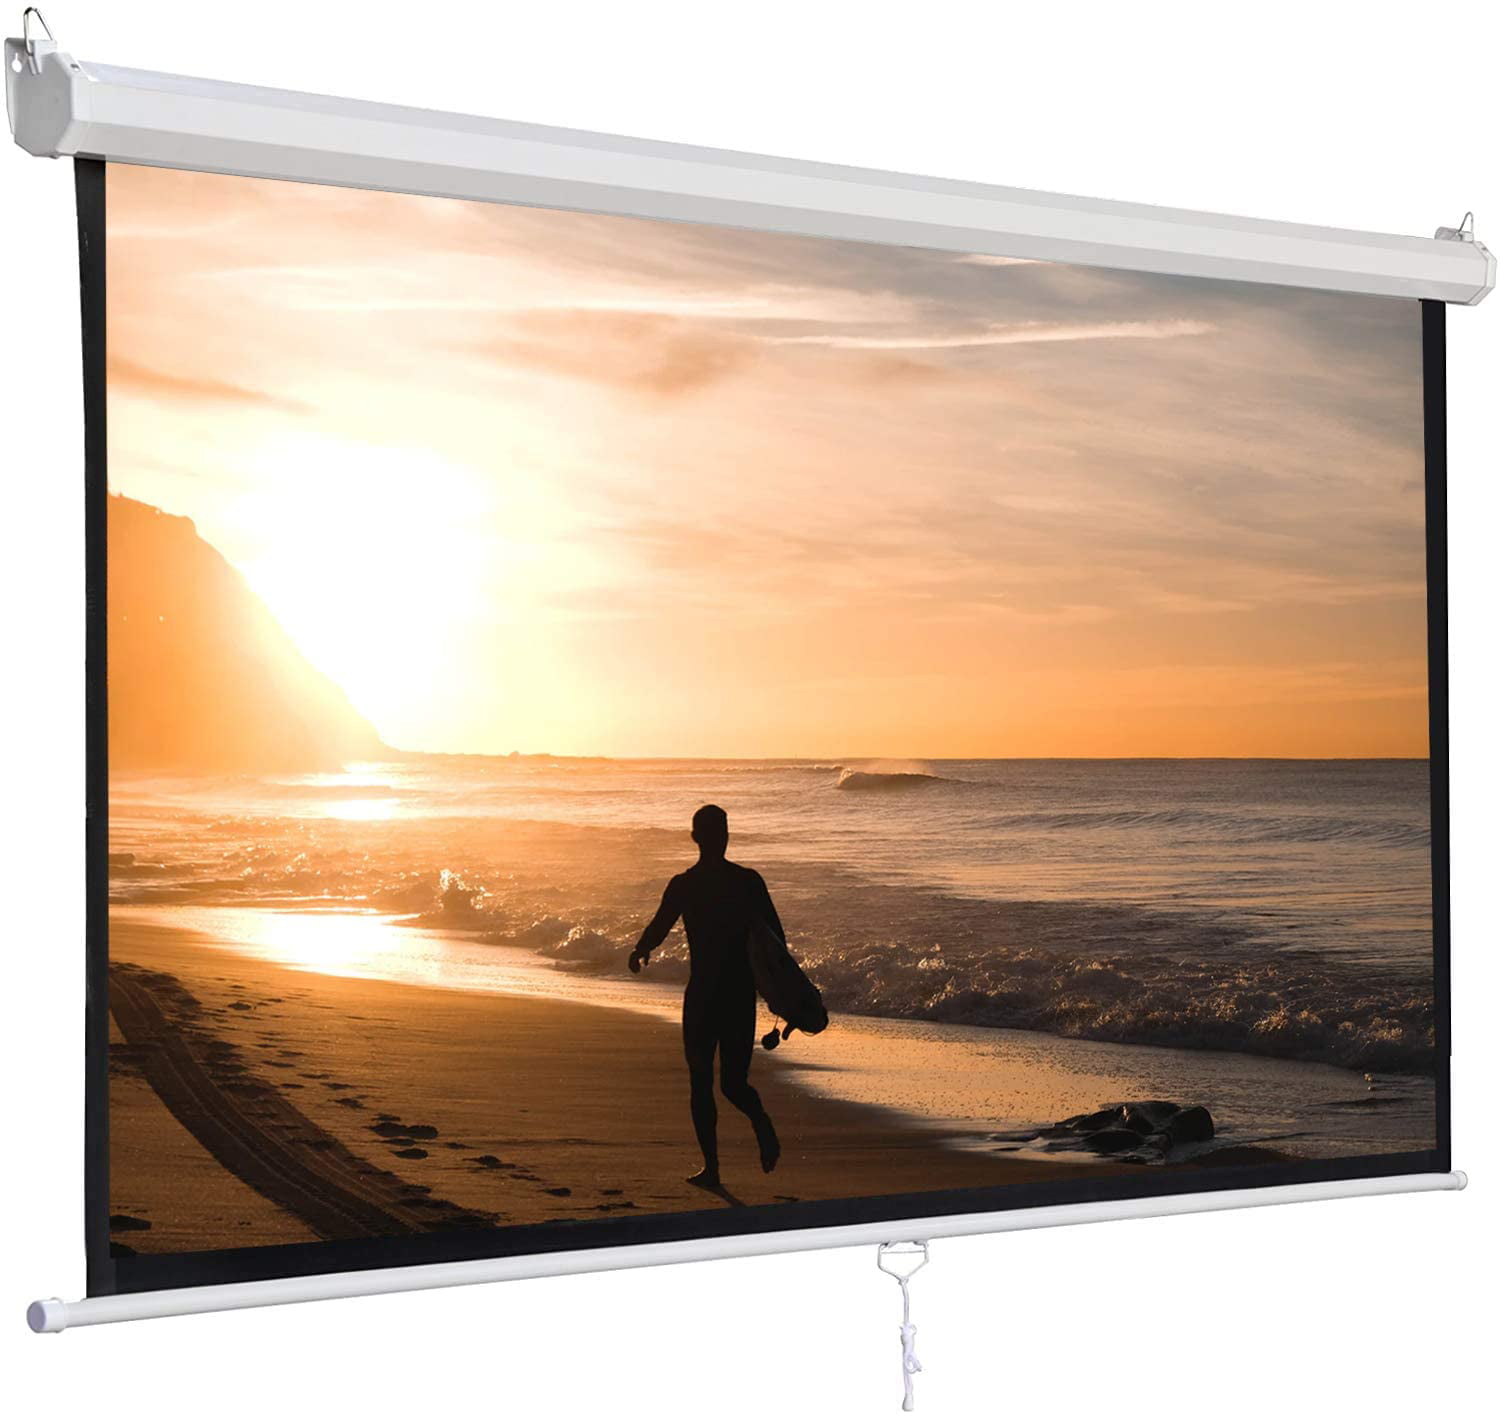 Leadzm 100" Projection Screen 4:3 Projector Manual Pull-up Screen Matte White 